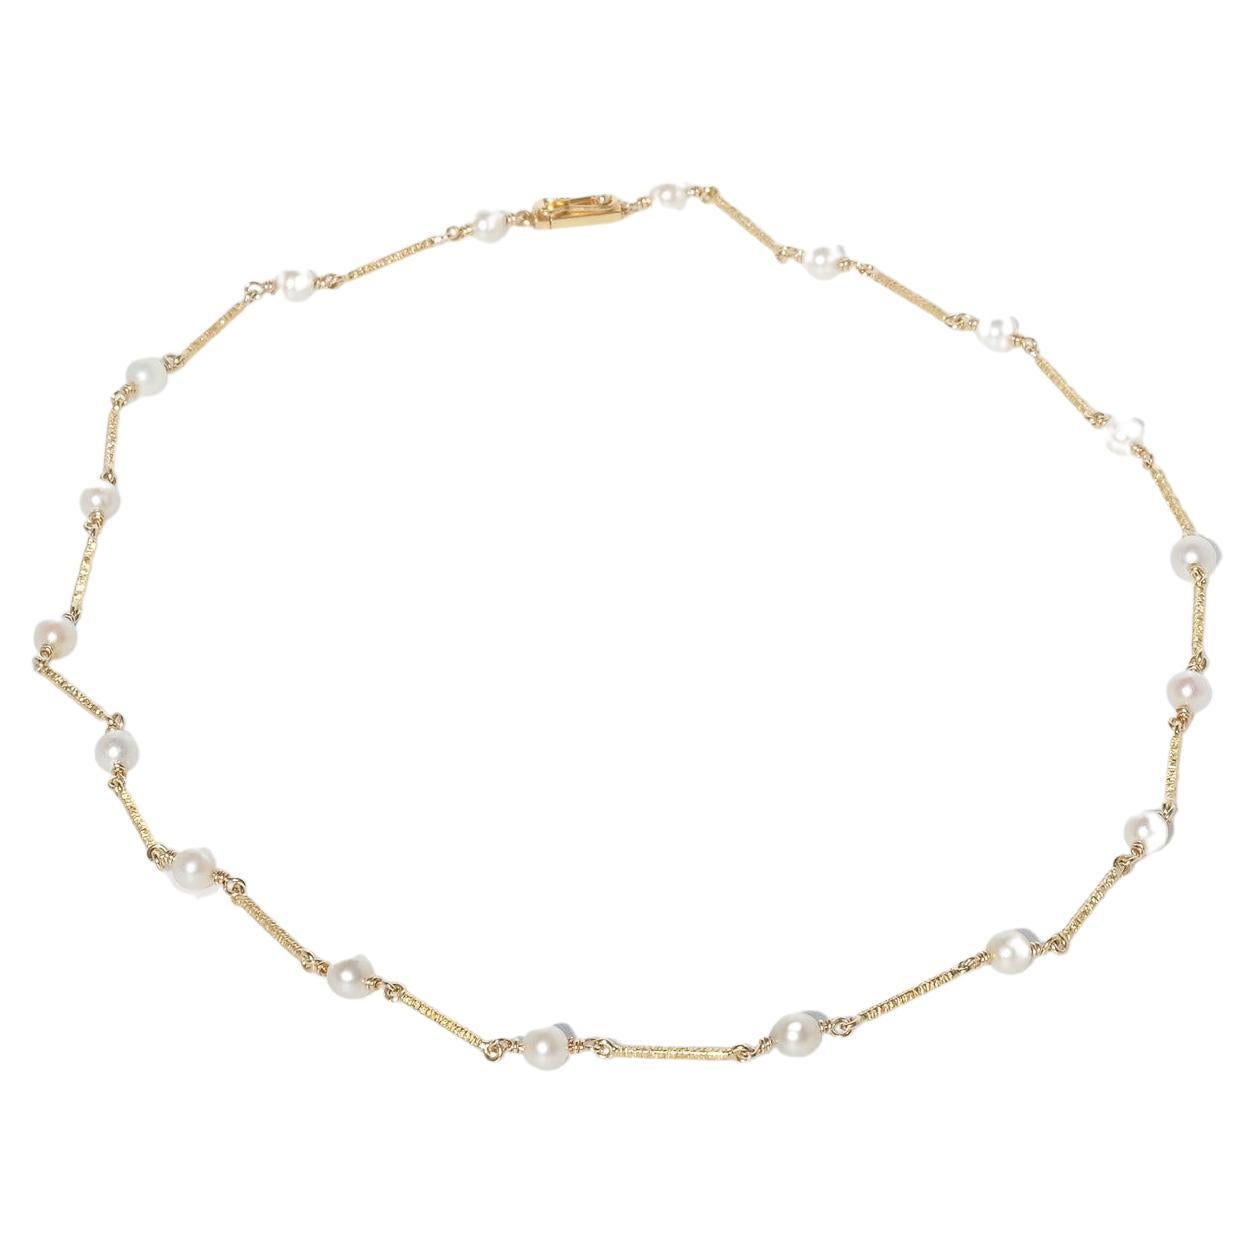 Vintage 14k Gold and Pearl Necklace Made Year 1968 by Konstantin Buchert For Sale